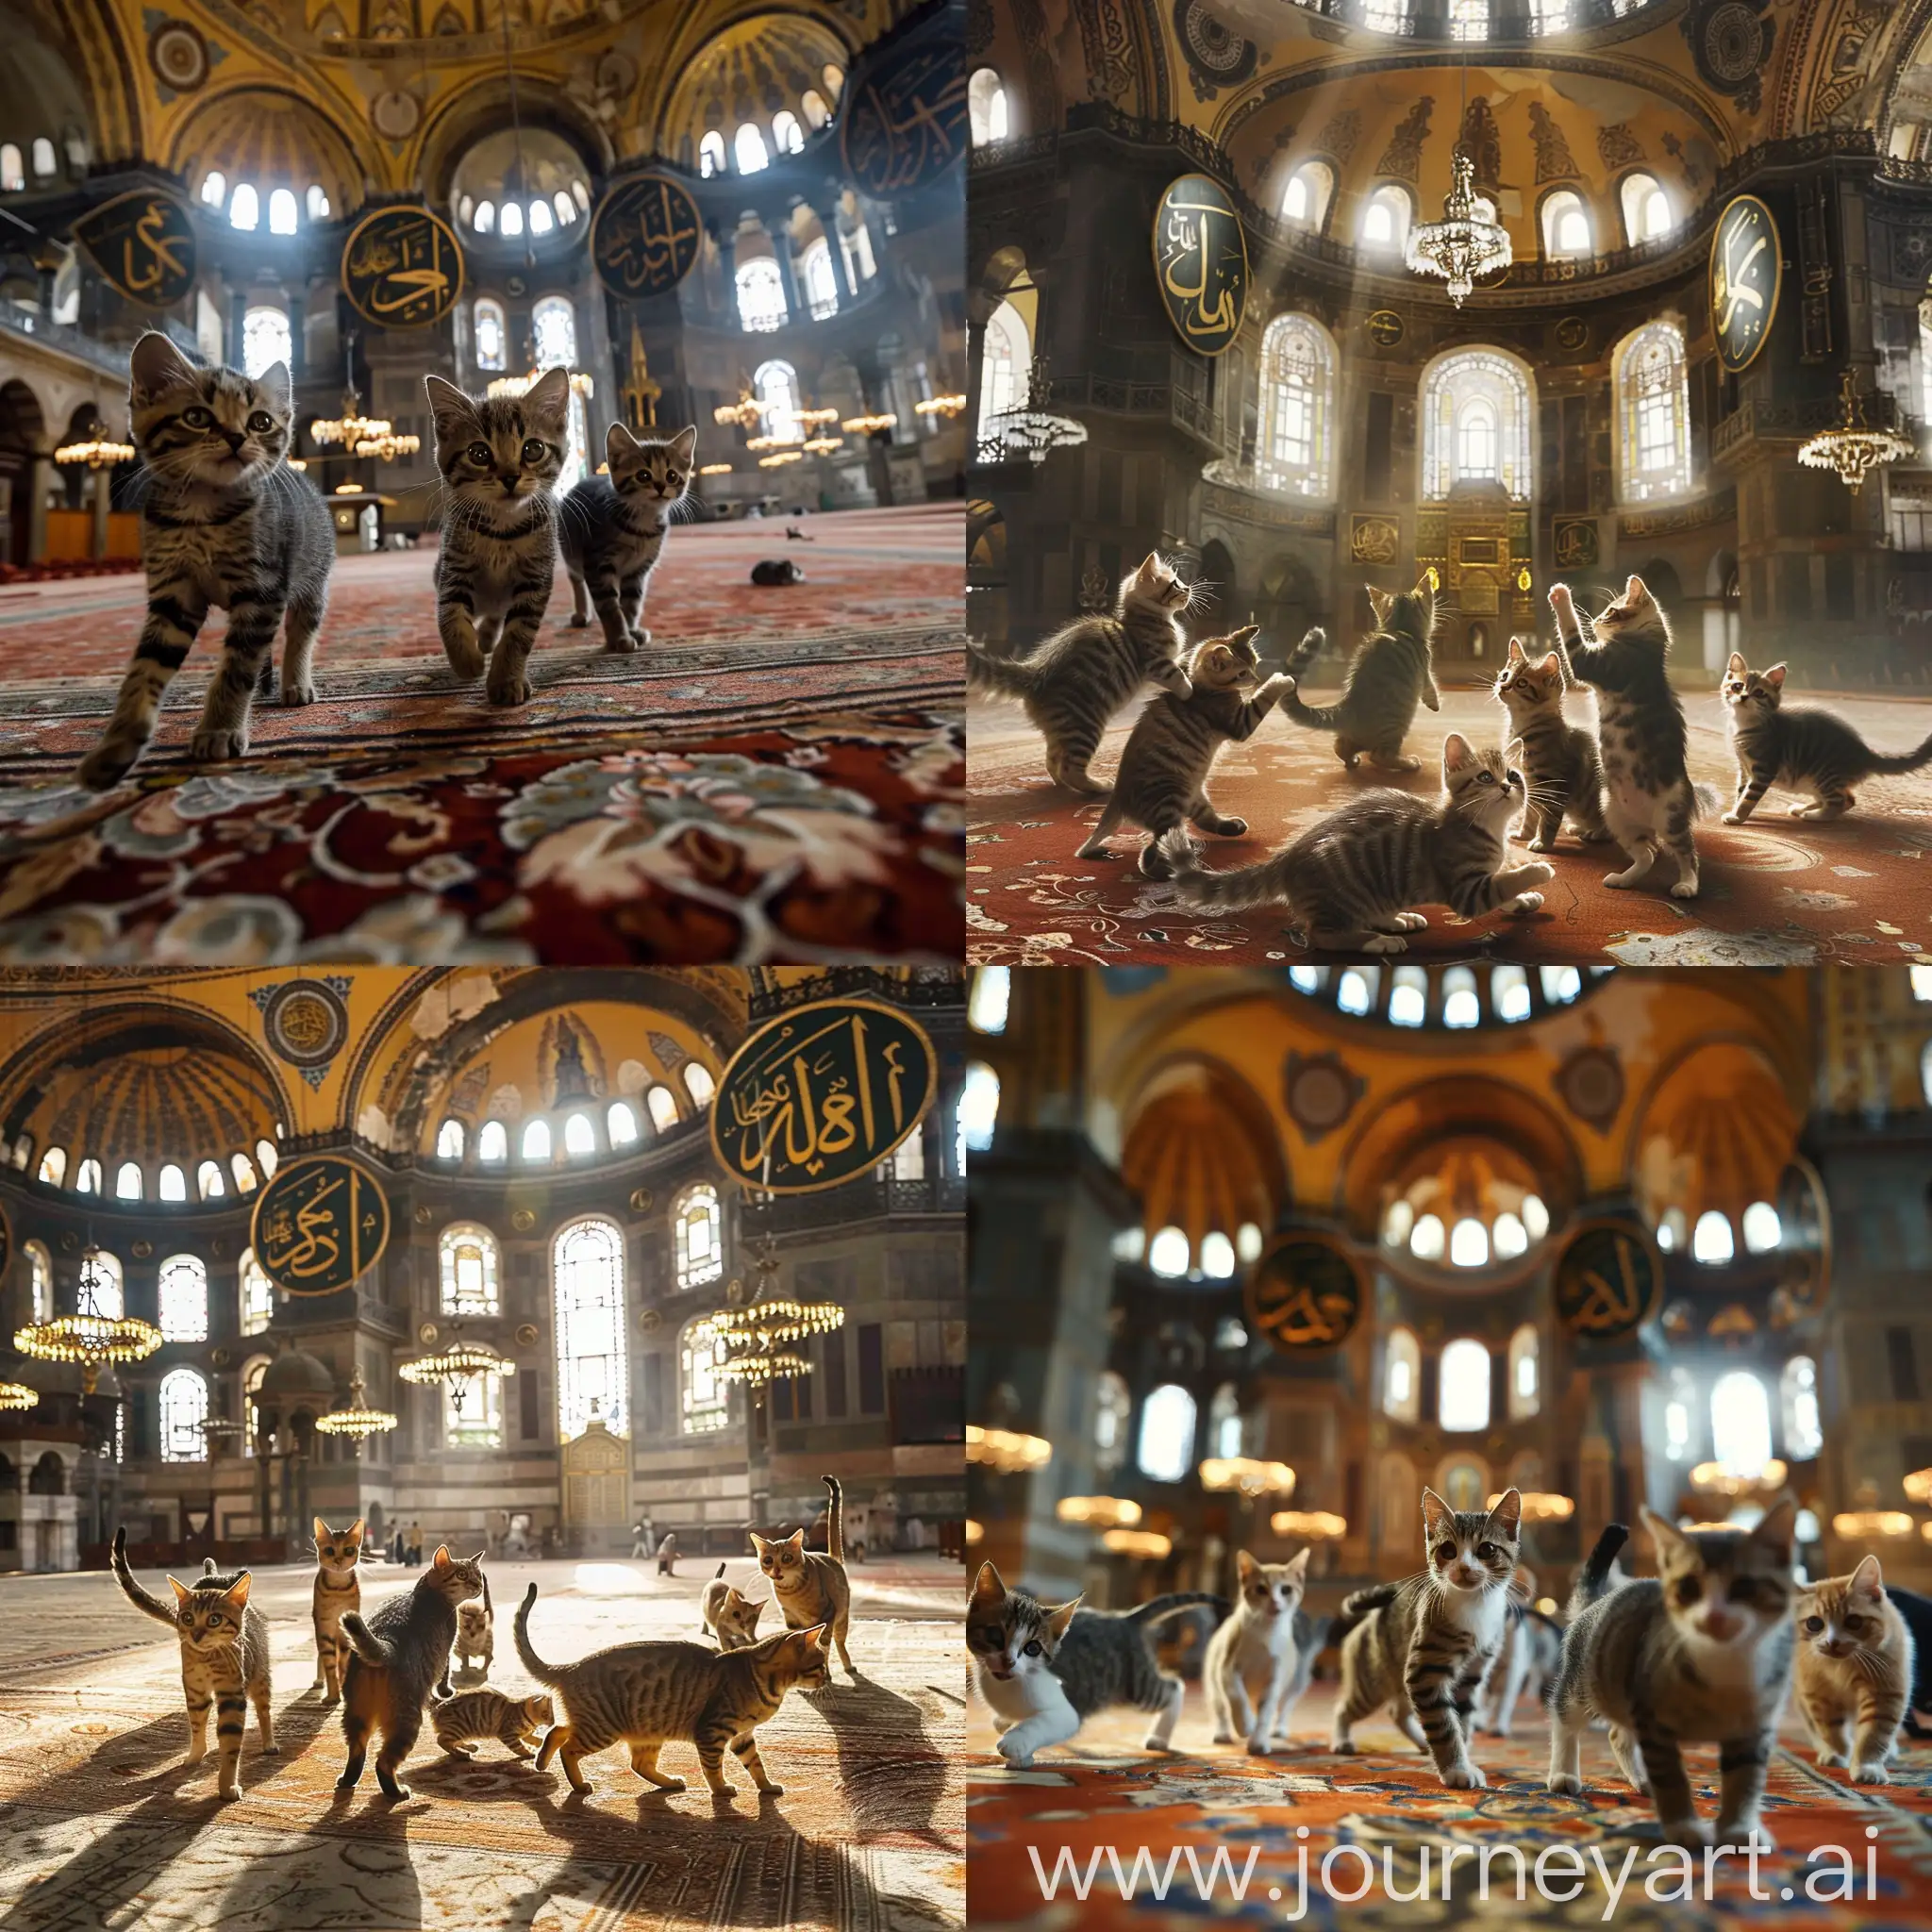 Cats Playing in a Haya Sofia mosque at Istanbul